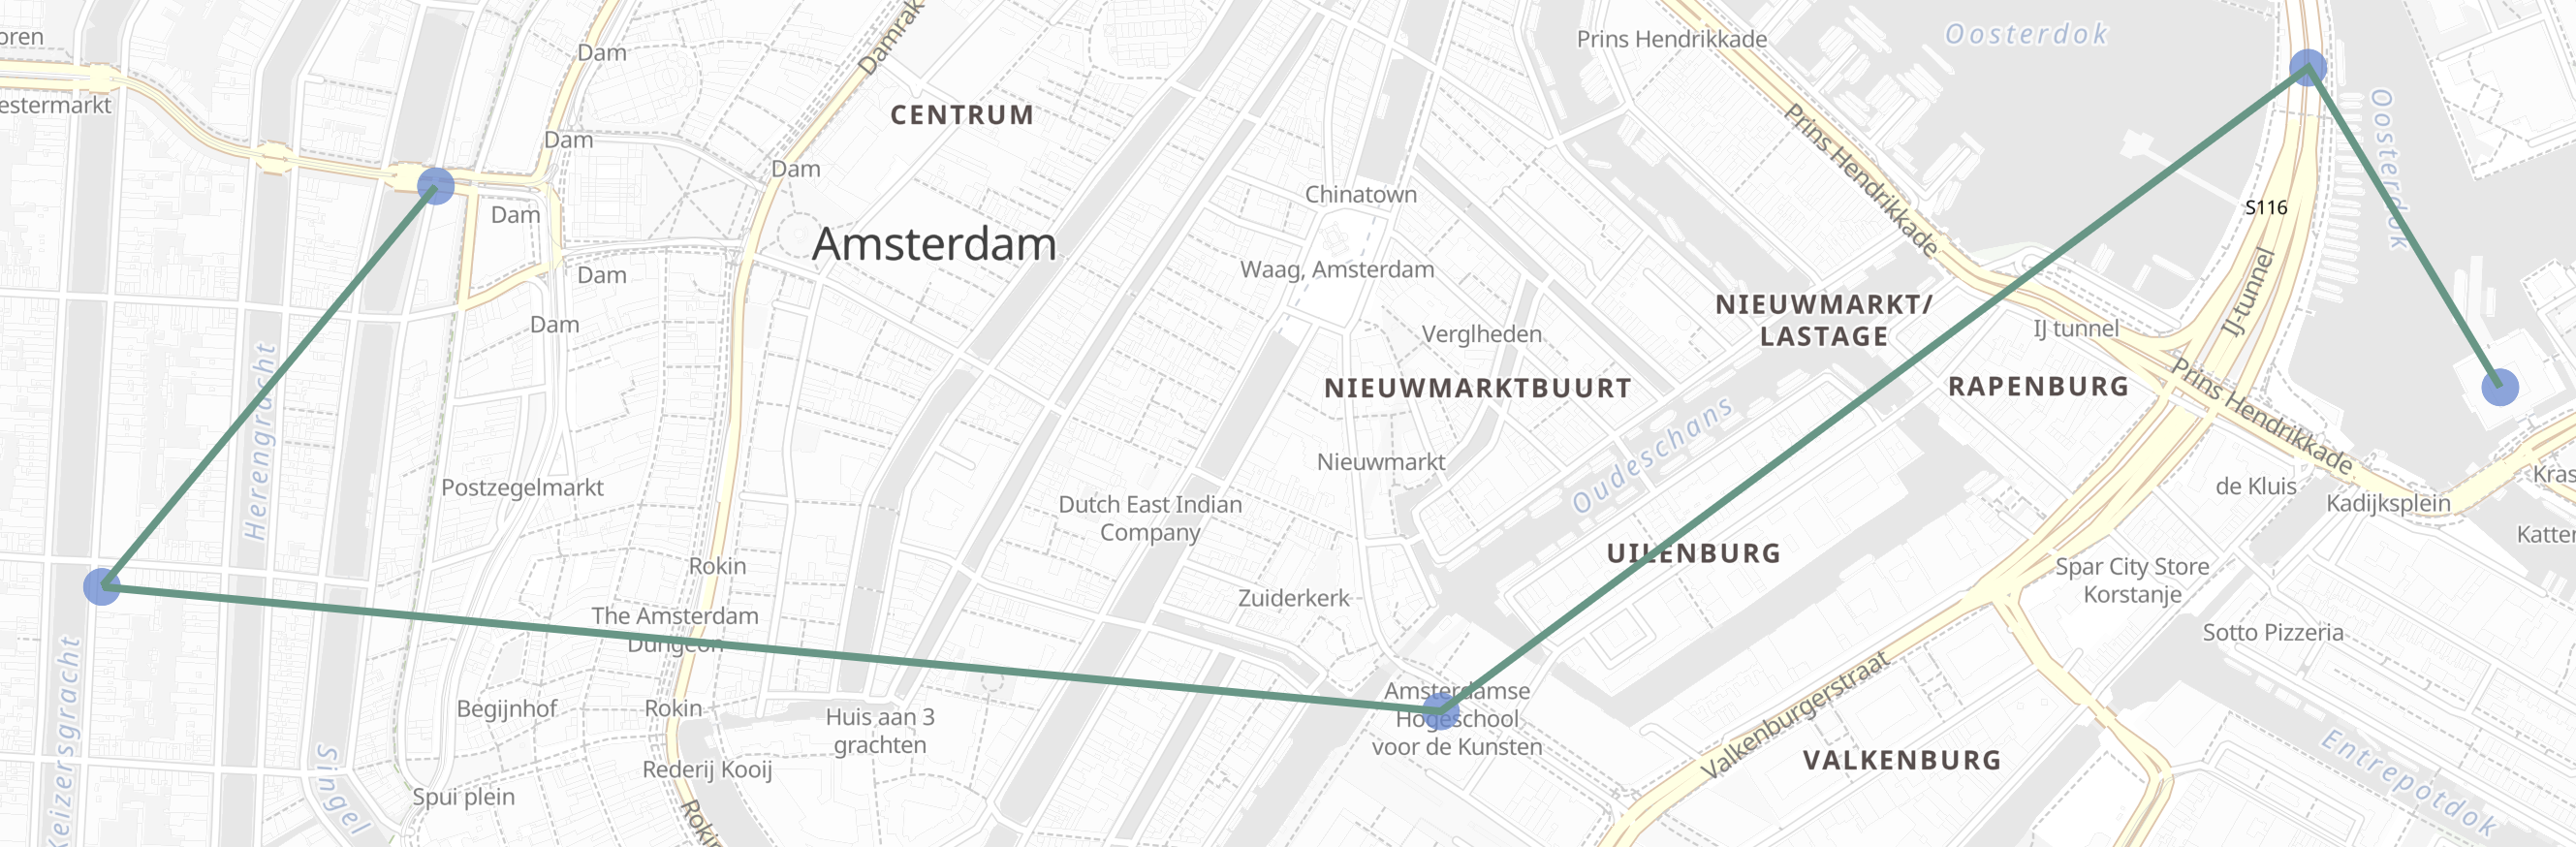 Kibana map with museum tour of Amsterdam